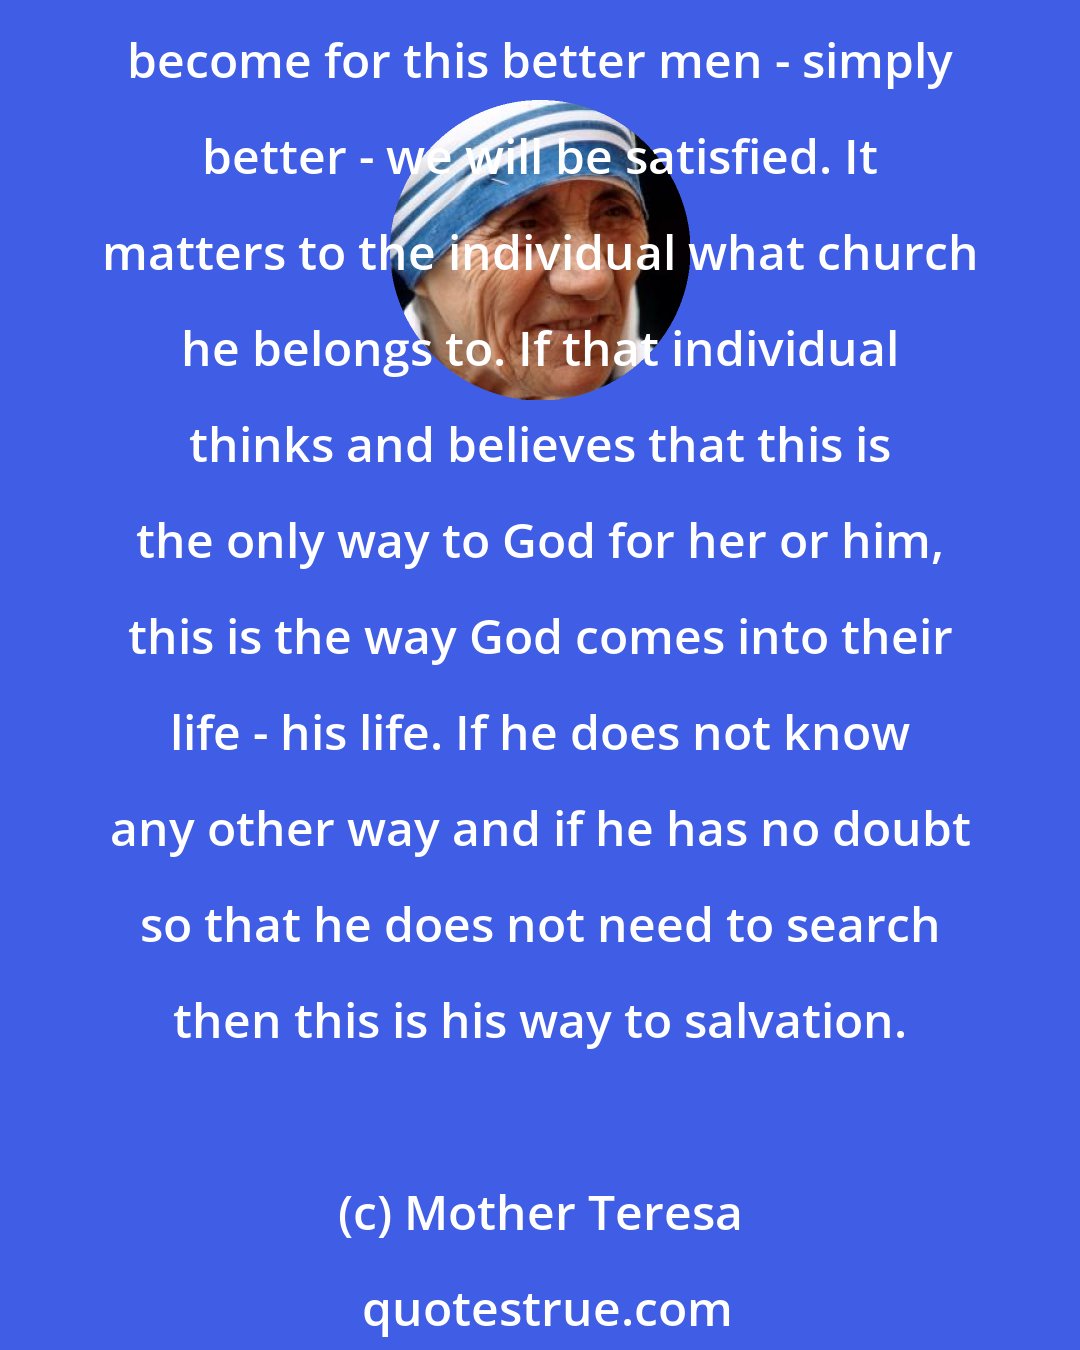 Mother Teresa: We never try to convert those who receive (aid) to Christianity but in our work we bear witness to the love of God's presence and if Catholics, Protestants, Buddhists, or agnostics become for this better men - simply better - we will be satisfied. It matters to the individual what church he belongs to. If that individual thinks and believes that this is the only way to God for her or him, this is the way God comes into their life - his life. If he does not know any other way and if he has no doubt so that he does not need to search then this is his way to salvation.